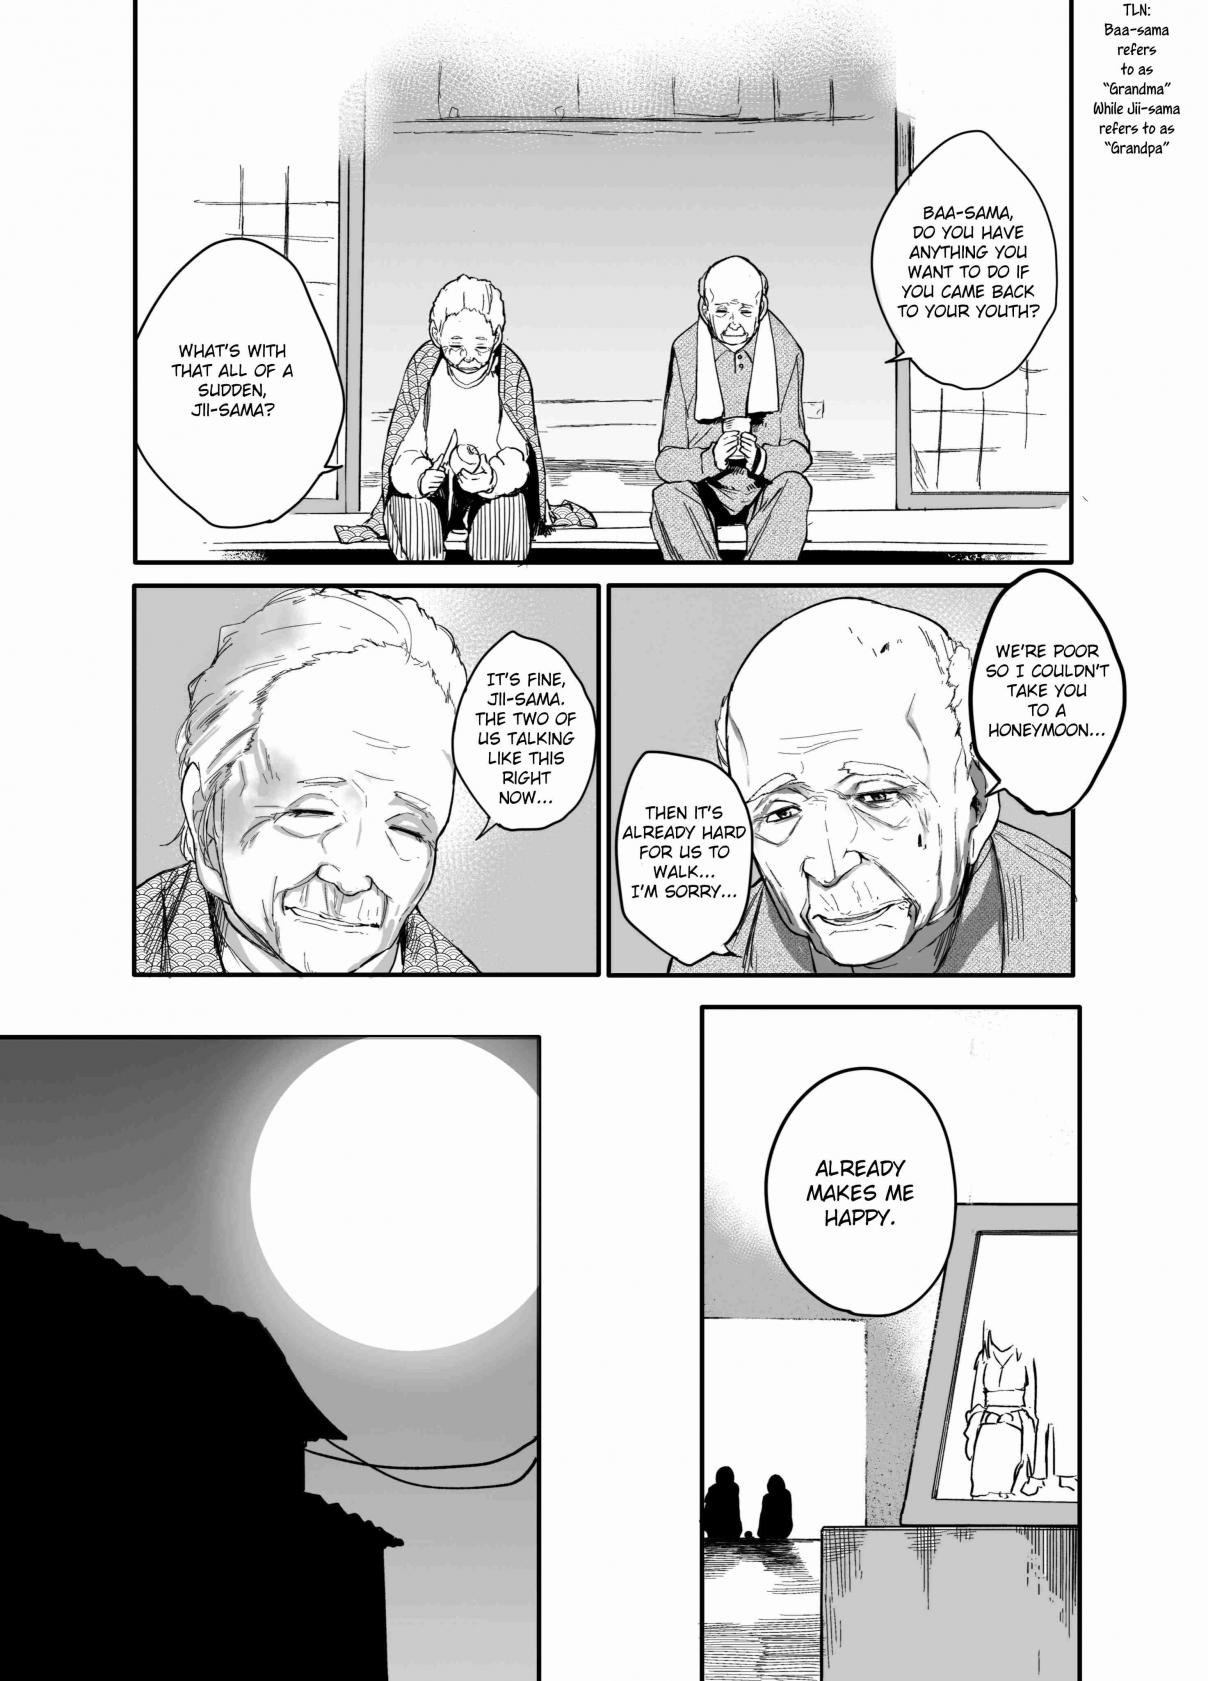 A Story About A Grandpa and Grandma who Returned Back to their Youth. Ch. 1